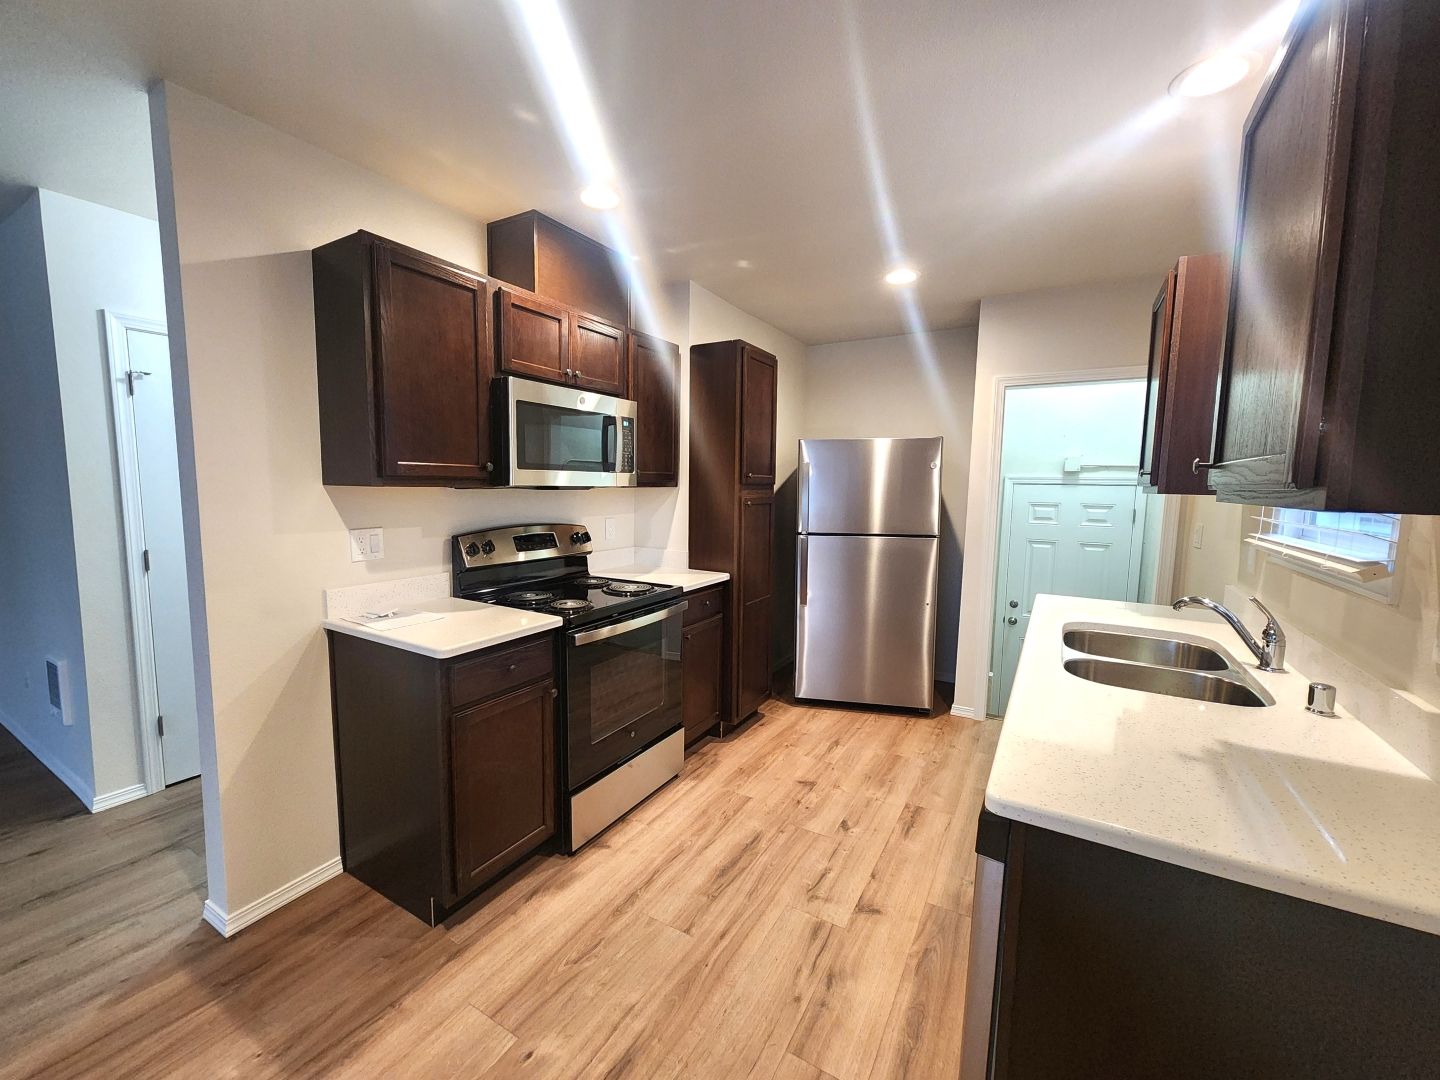 Fully Renovated Townhomes! Brand New Stainless Steel Appliances! & Bonus Area!